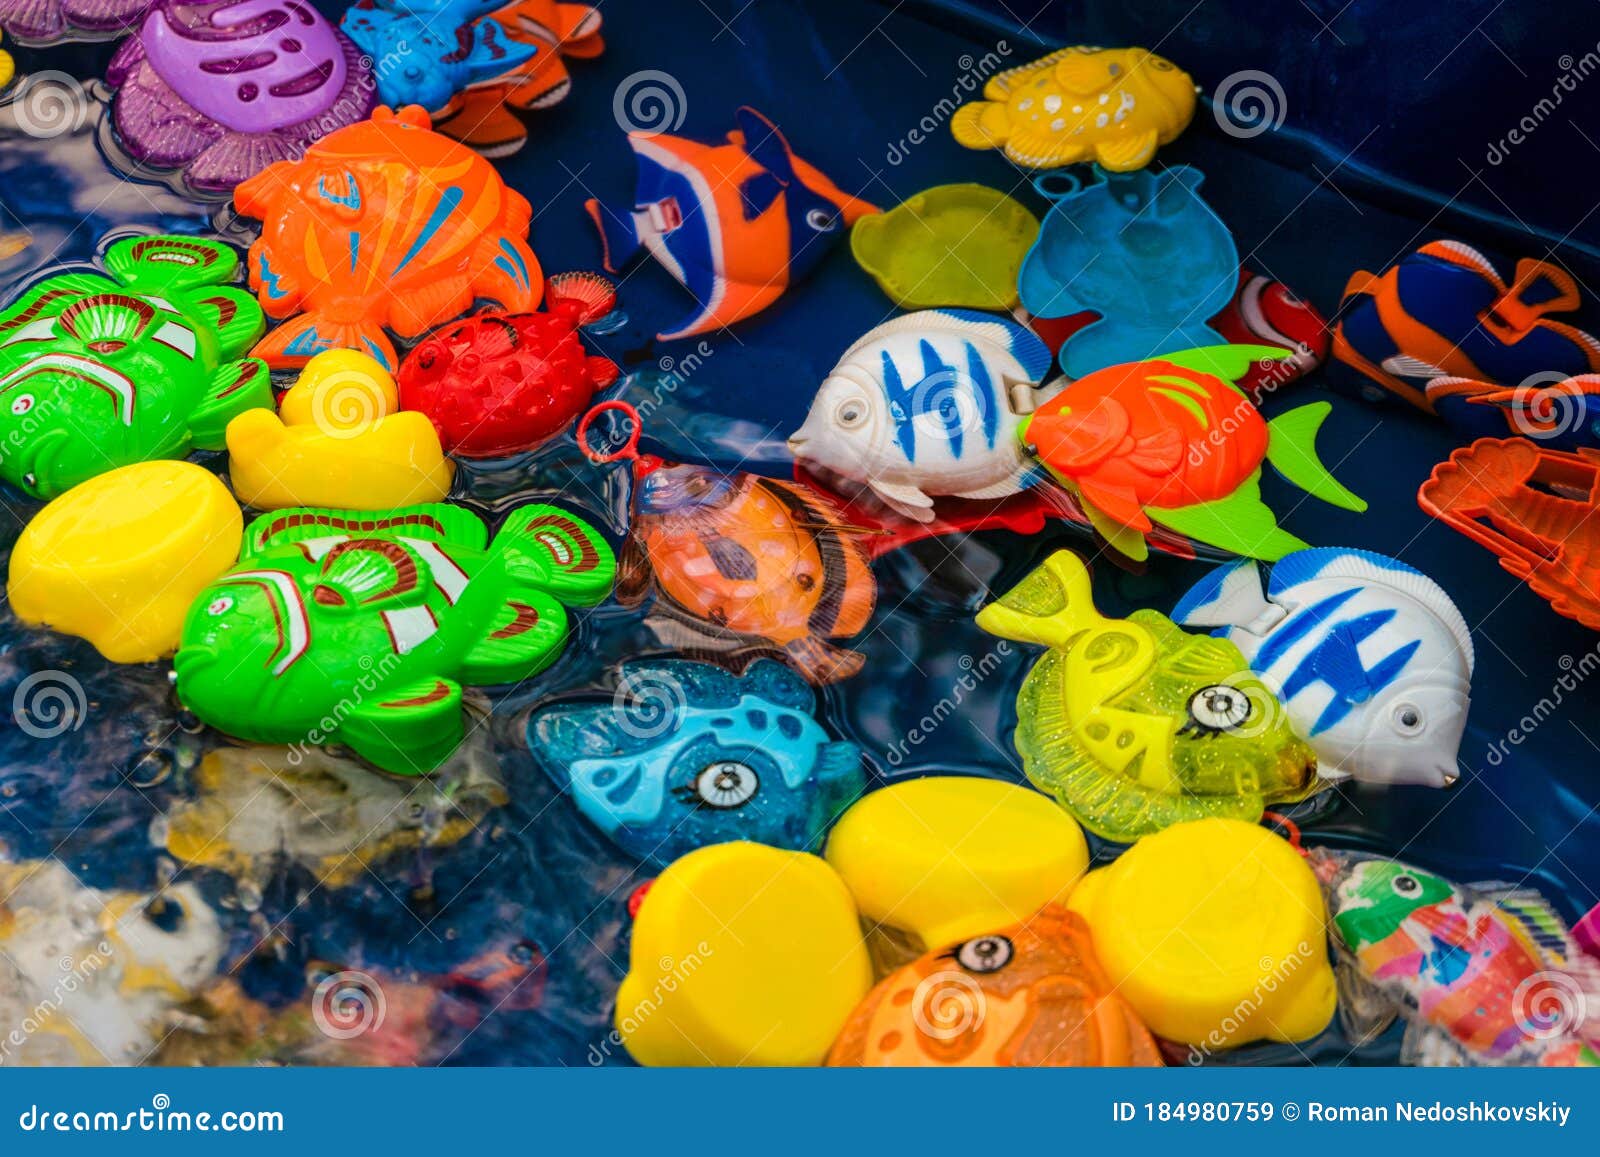 Childrens Plastic Colorful Fish Toys in the Pool for Playing in the Fishing  Stock Image - Image of funfair, outdoors: 184980759